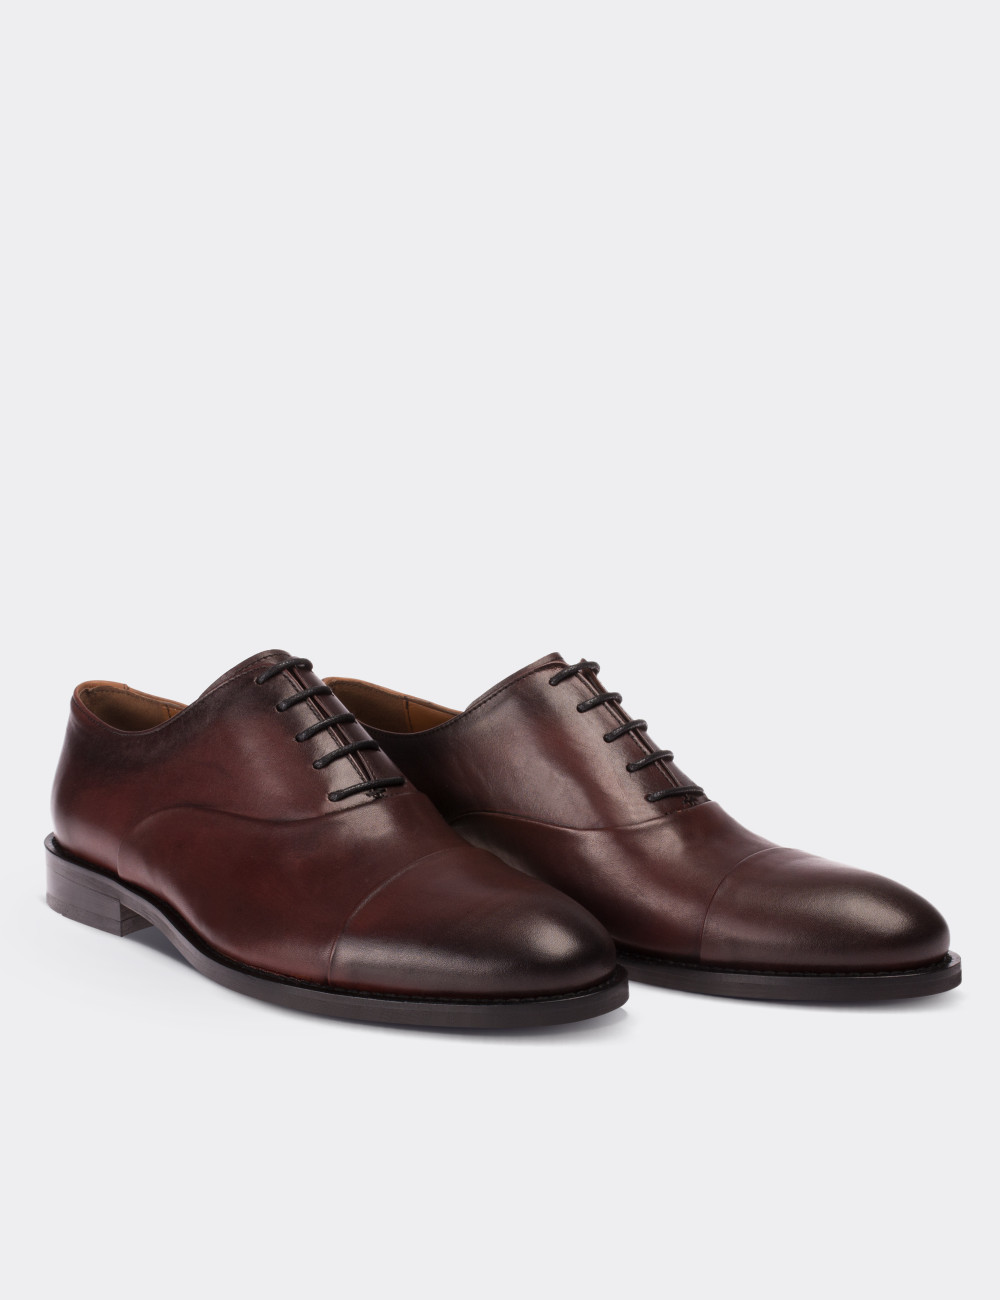 Burgundy  Leather Classic Shoes - 01026MBRDM01